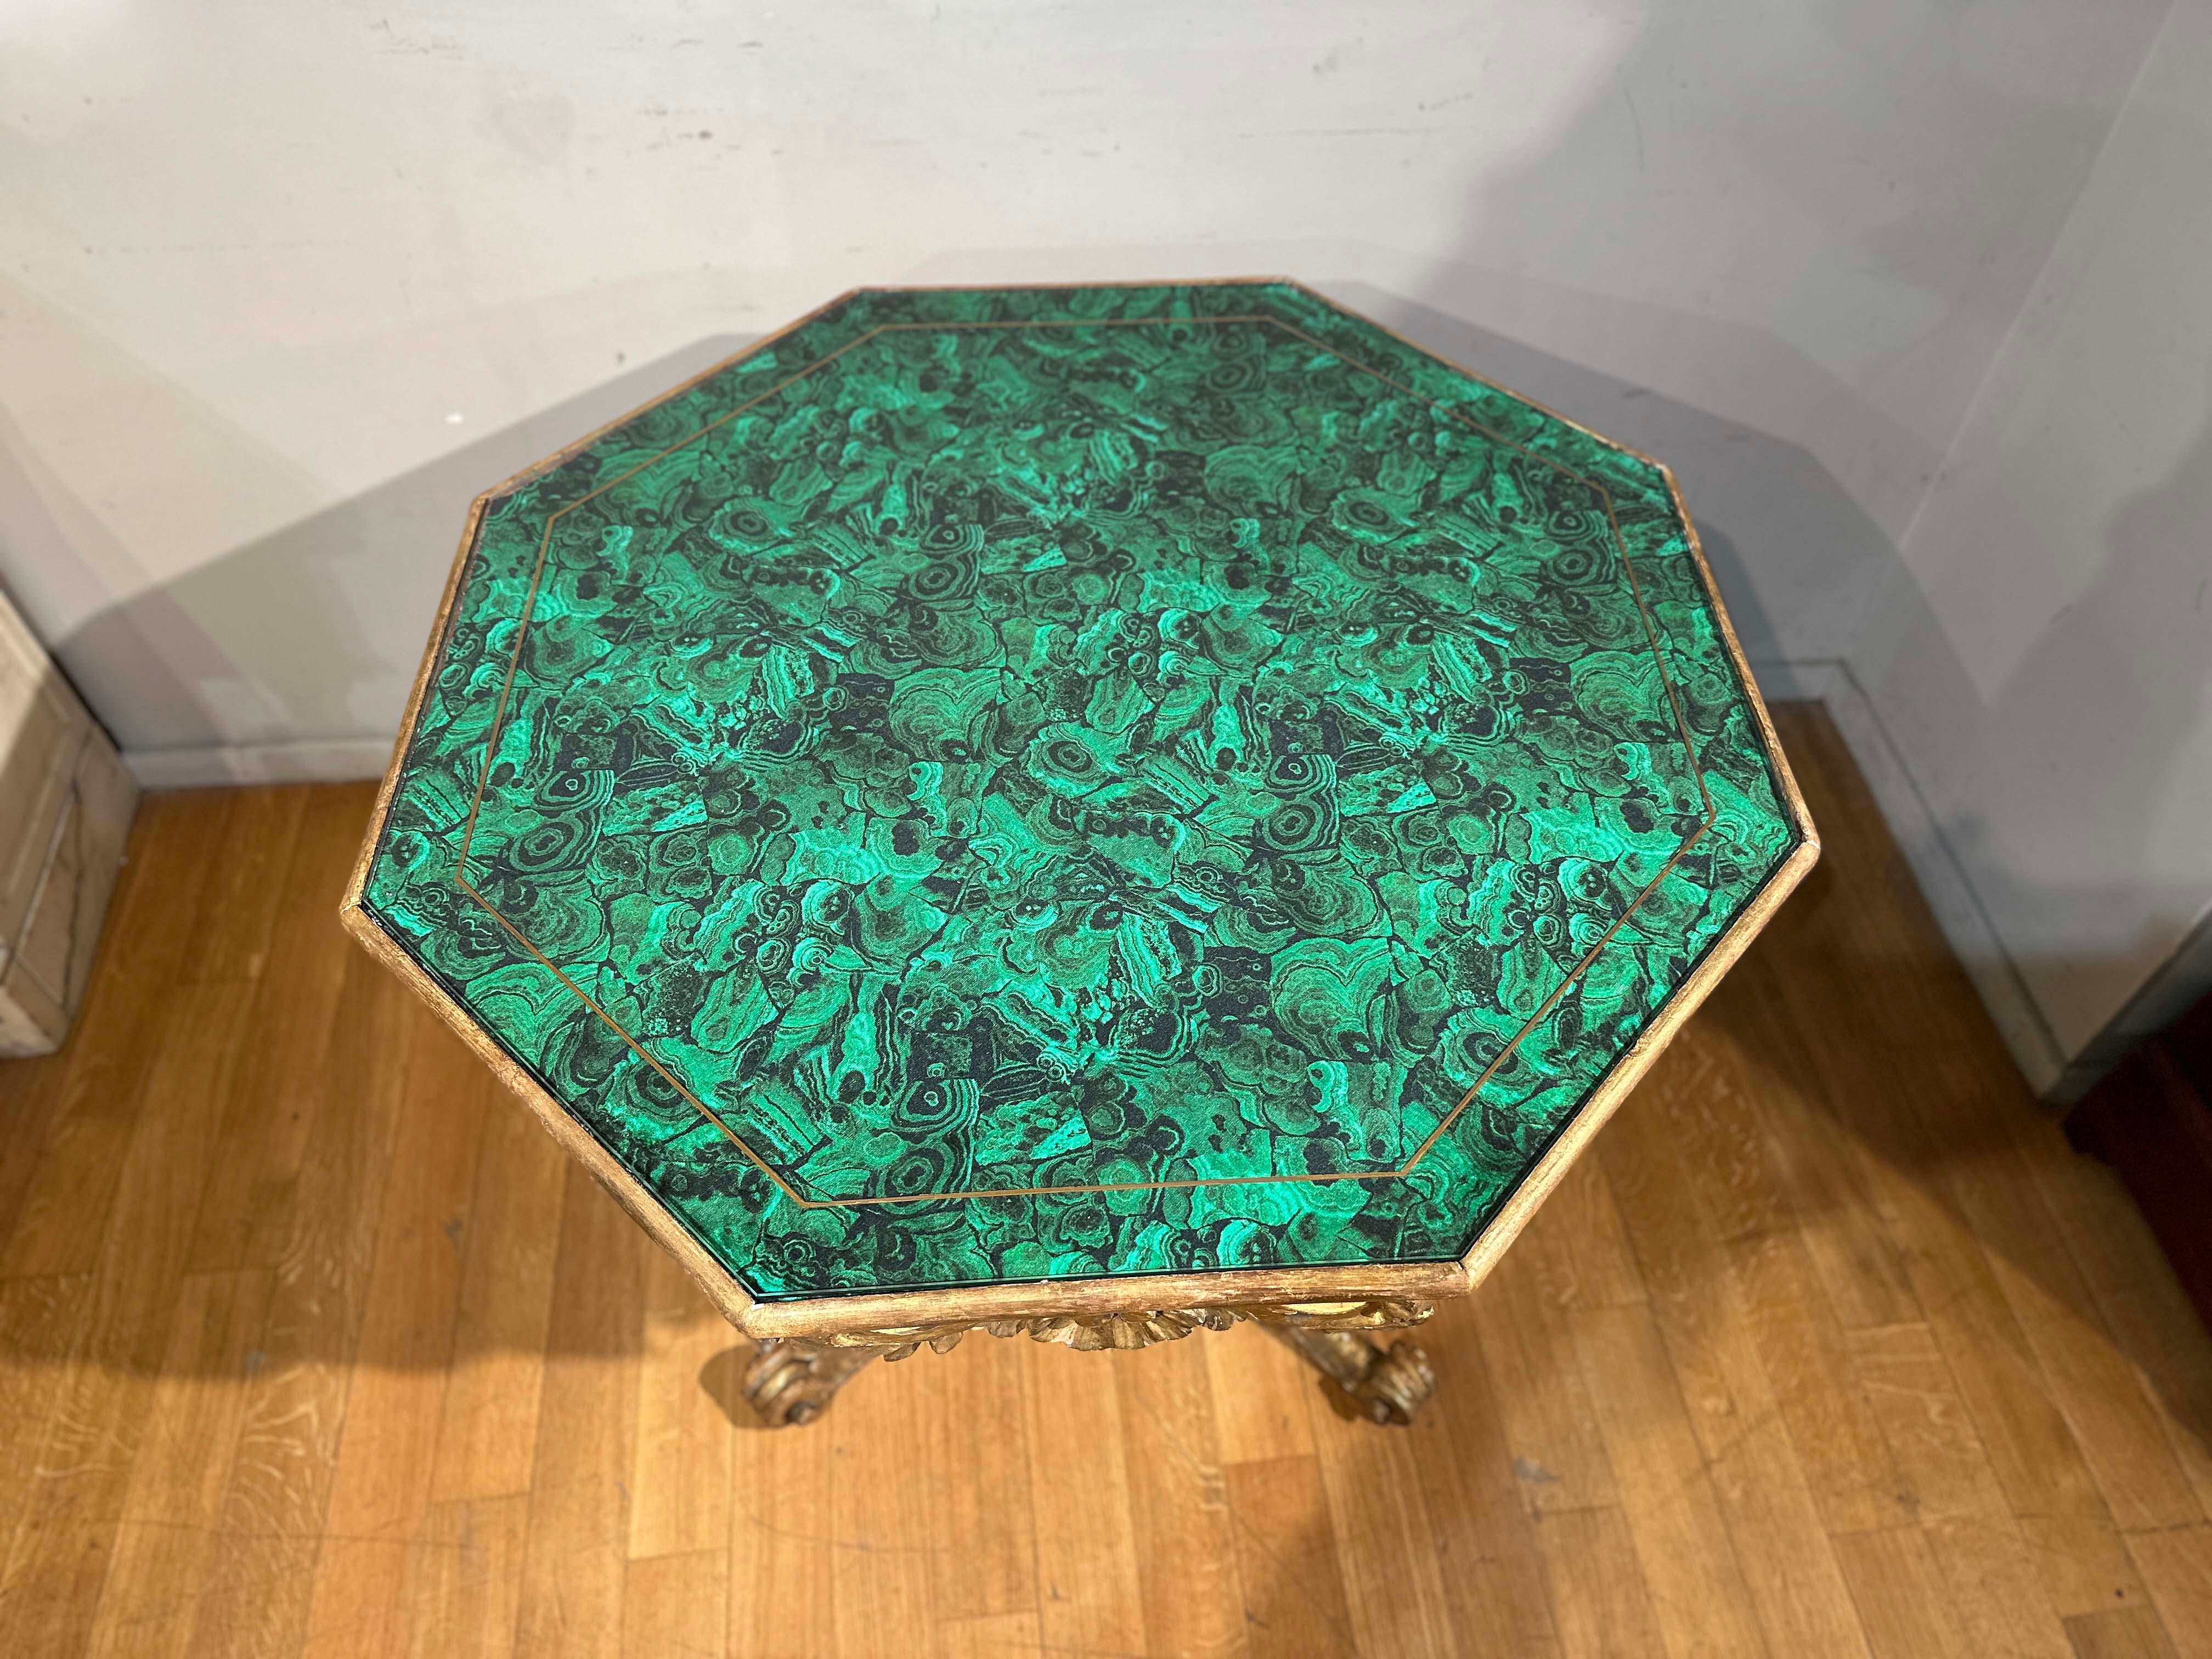 EARLY 19th CENTURY GILDED WOOD TABLE WITH SIMILAR MALACHITE FABRIC For Sale 2